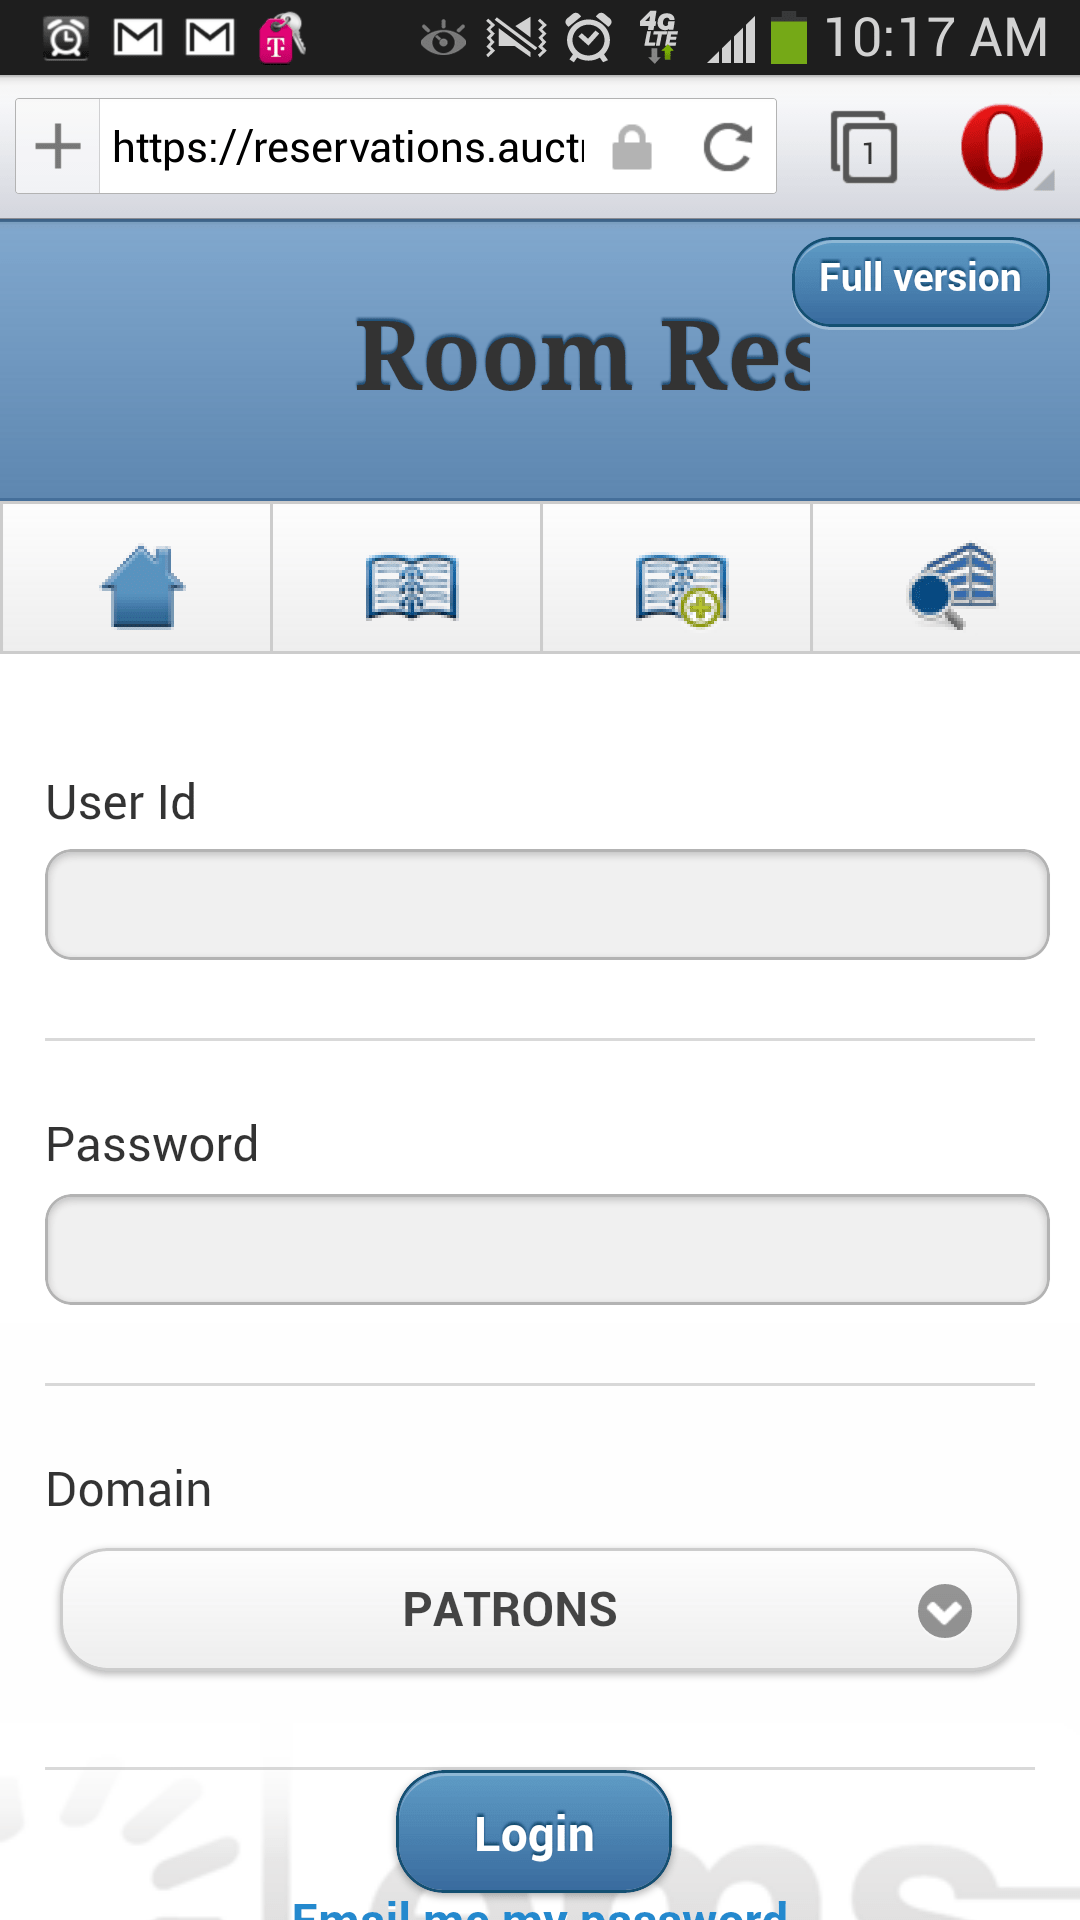 Virtual Room Reservations Home Screen (pictured on Android device)